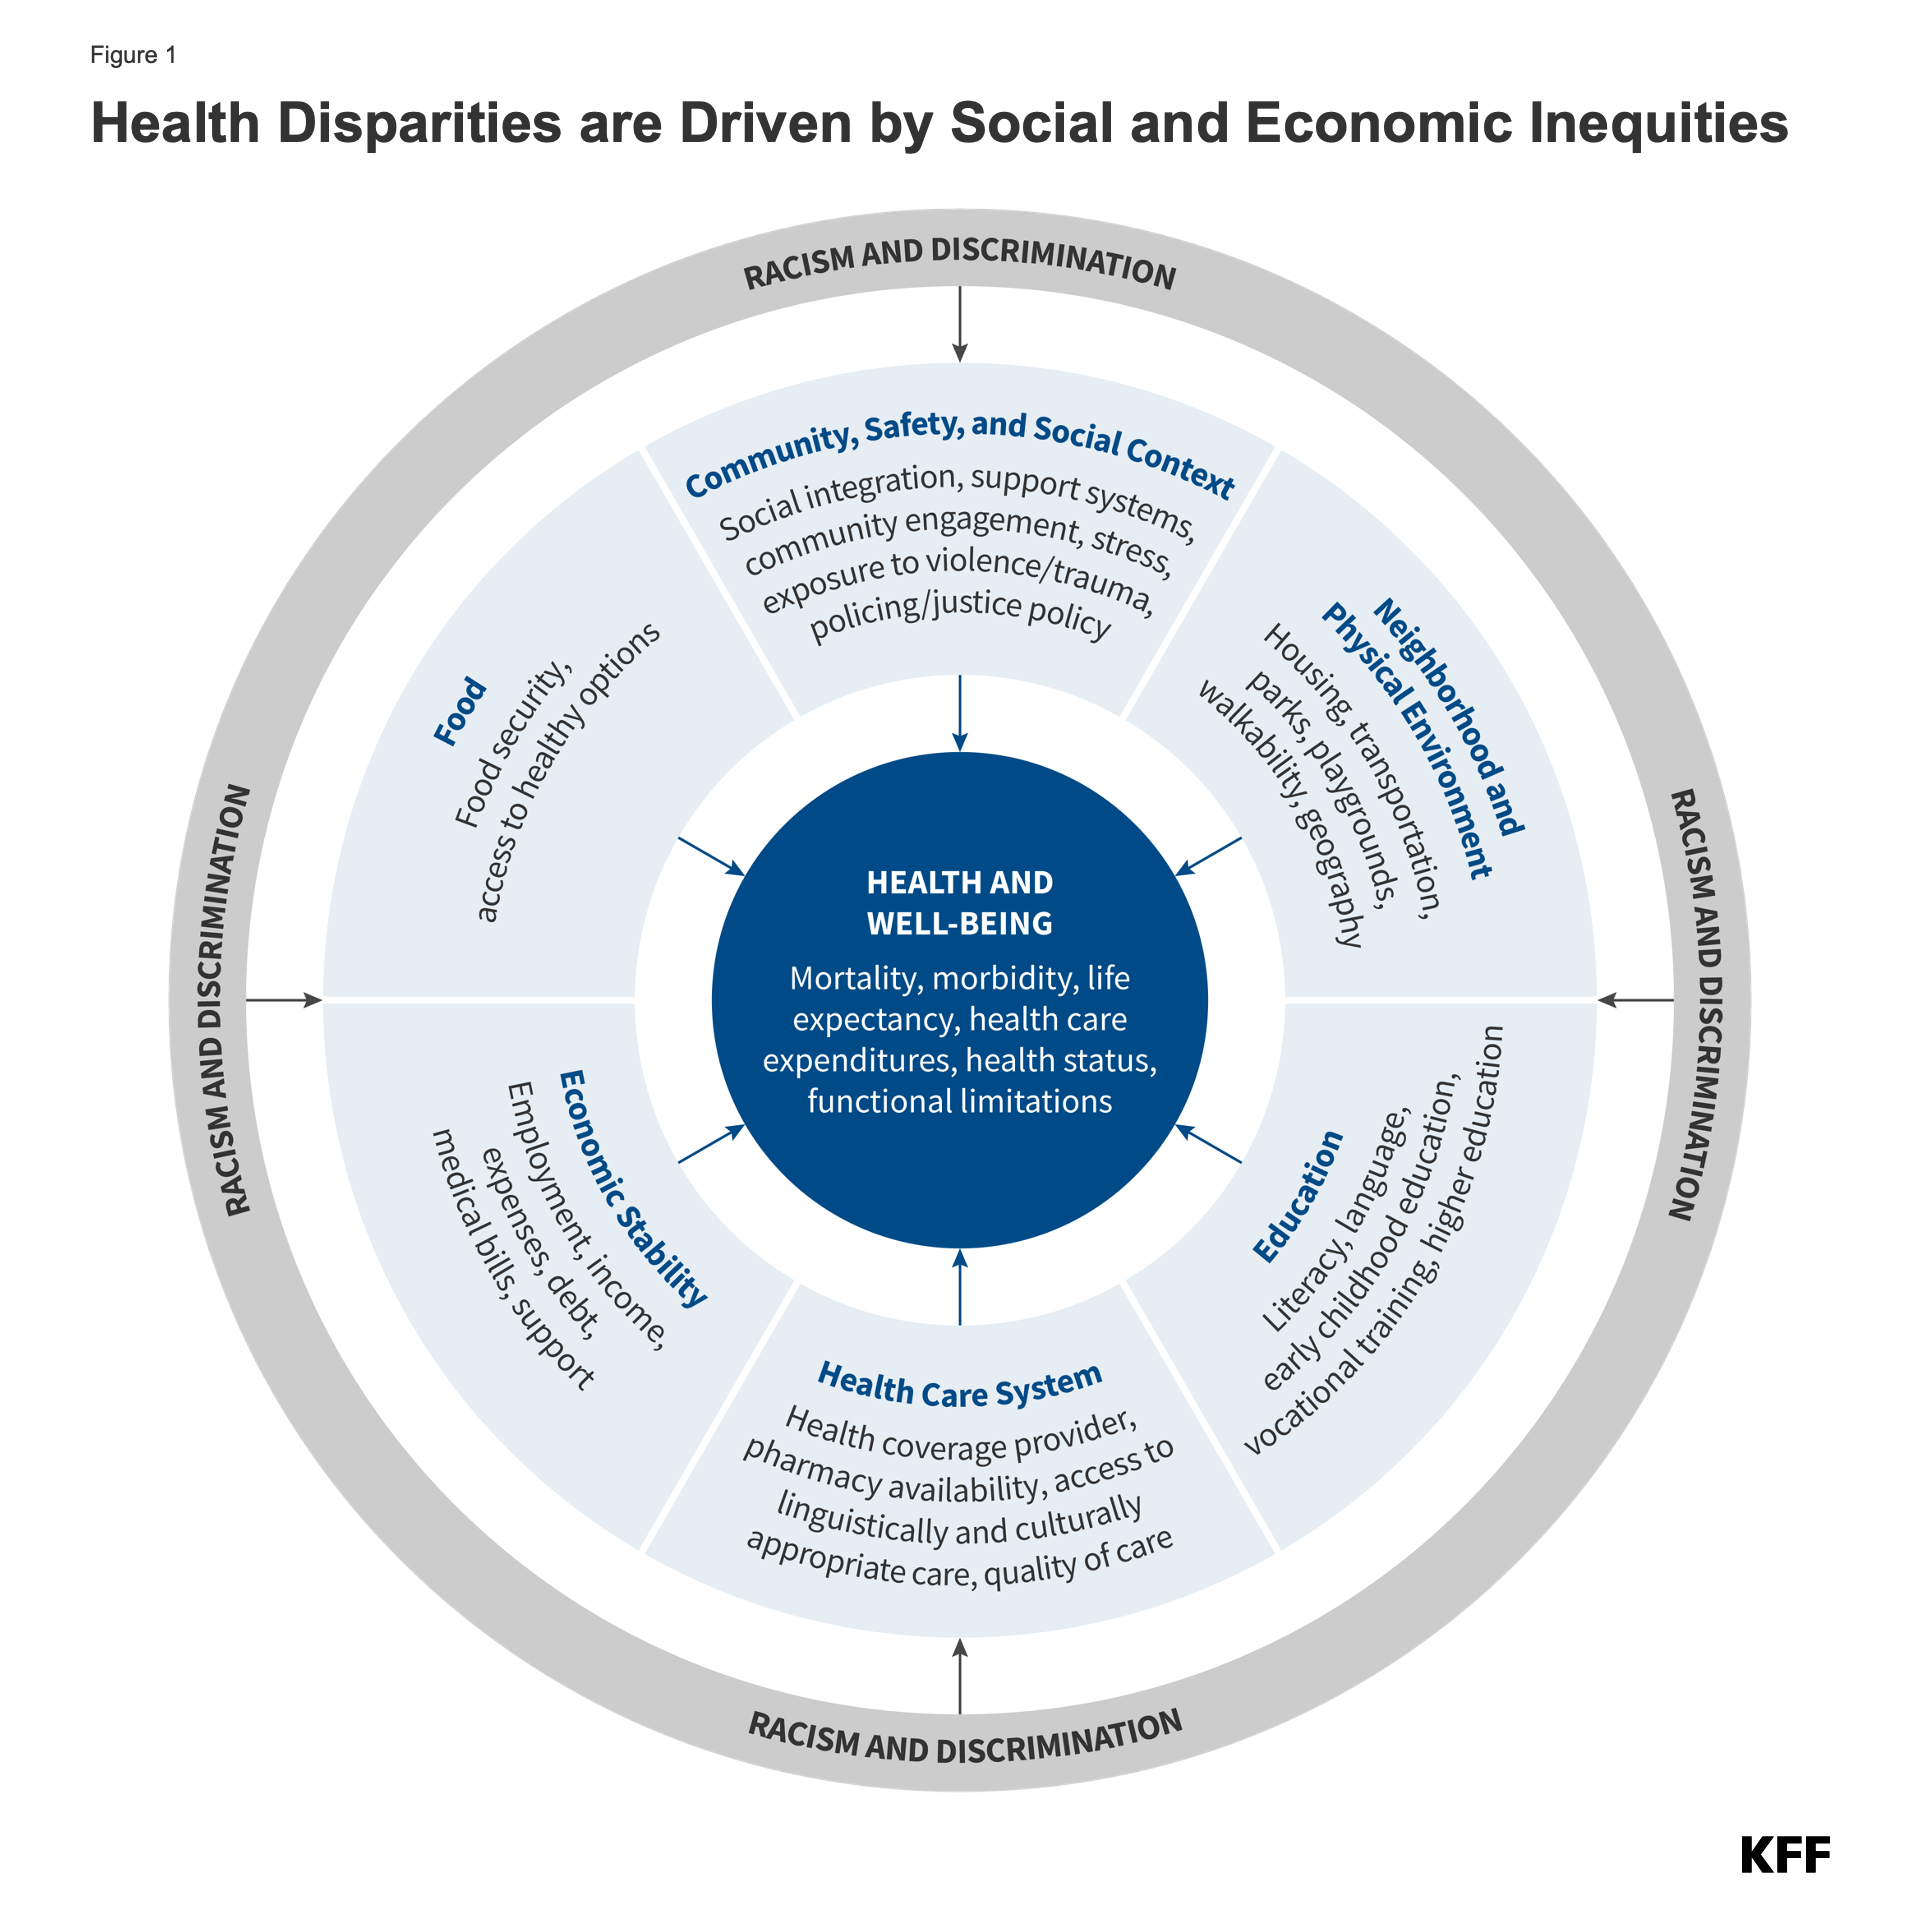 A graphic displaying how health disparities ar driven by social and economic inequities.